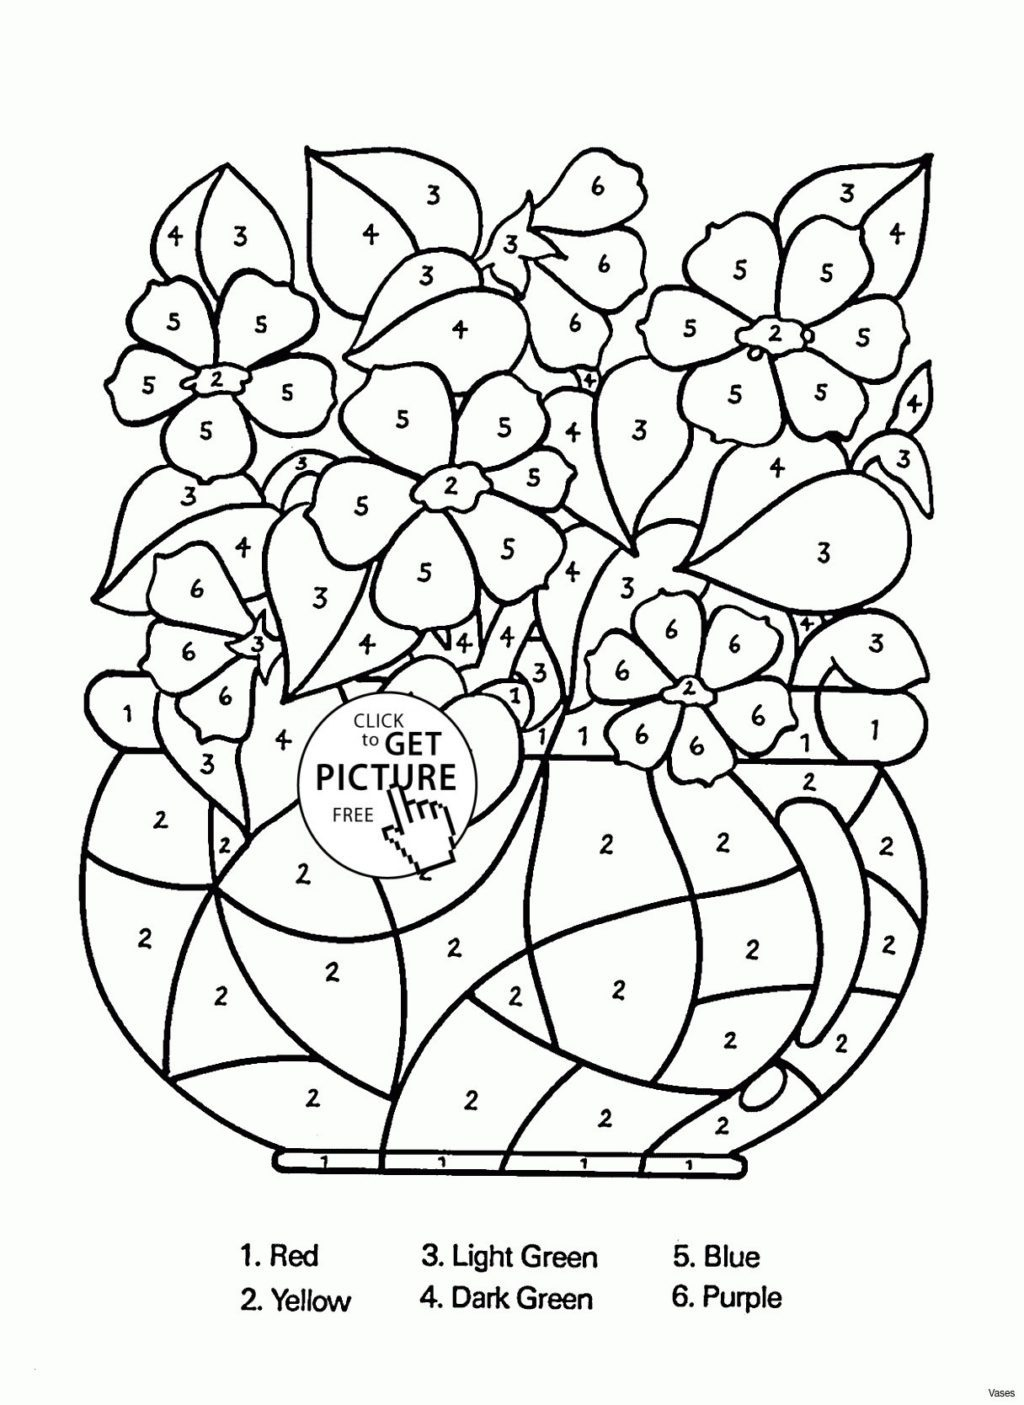 How To Print Coloring Pages Coloring Pages Free Printable Coloring Pages For 5 Year Olds